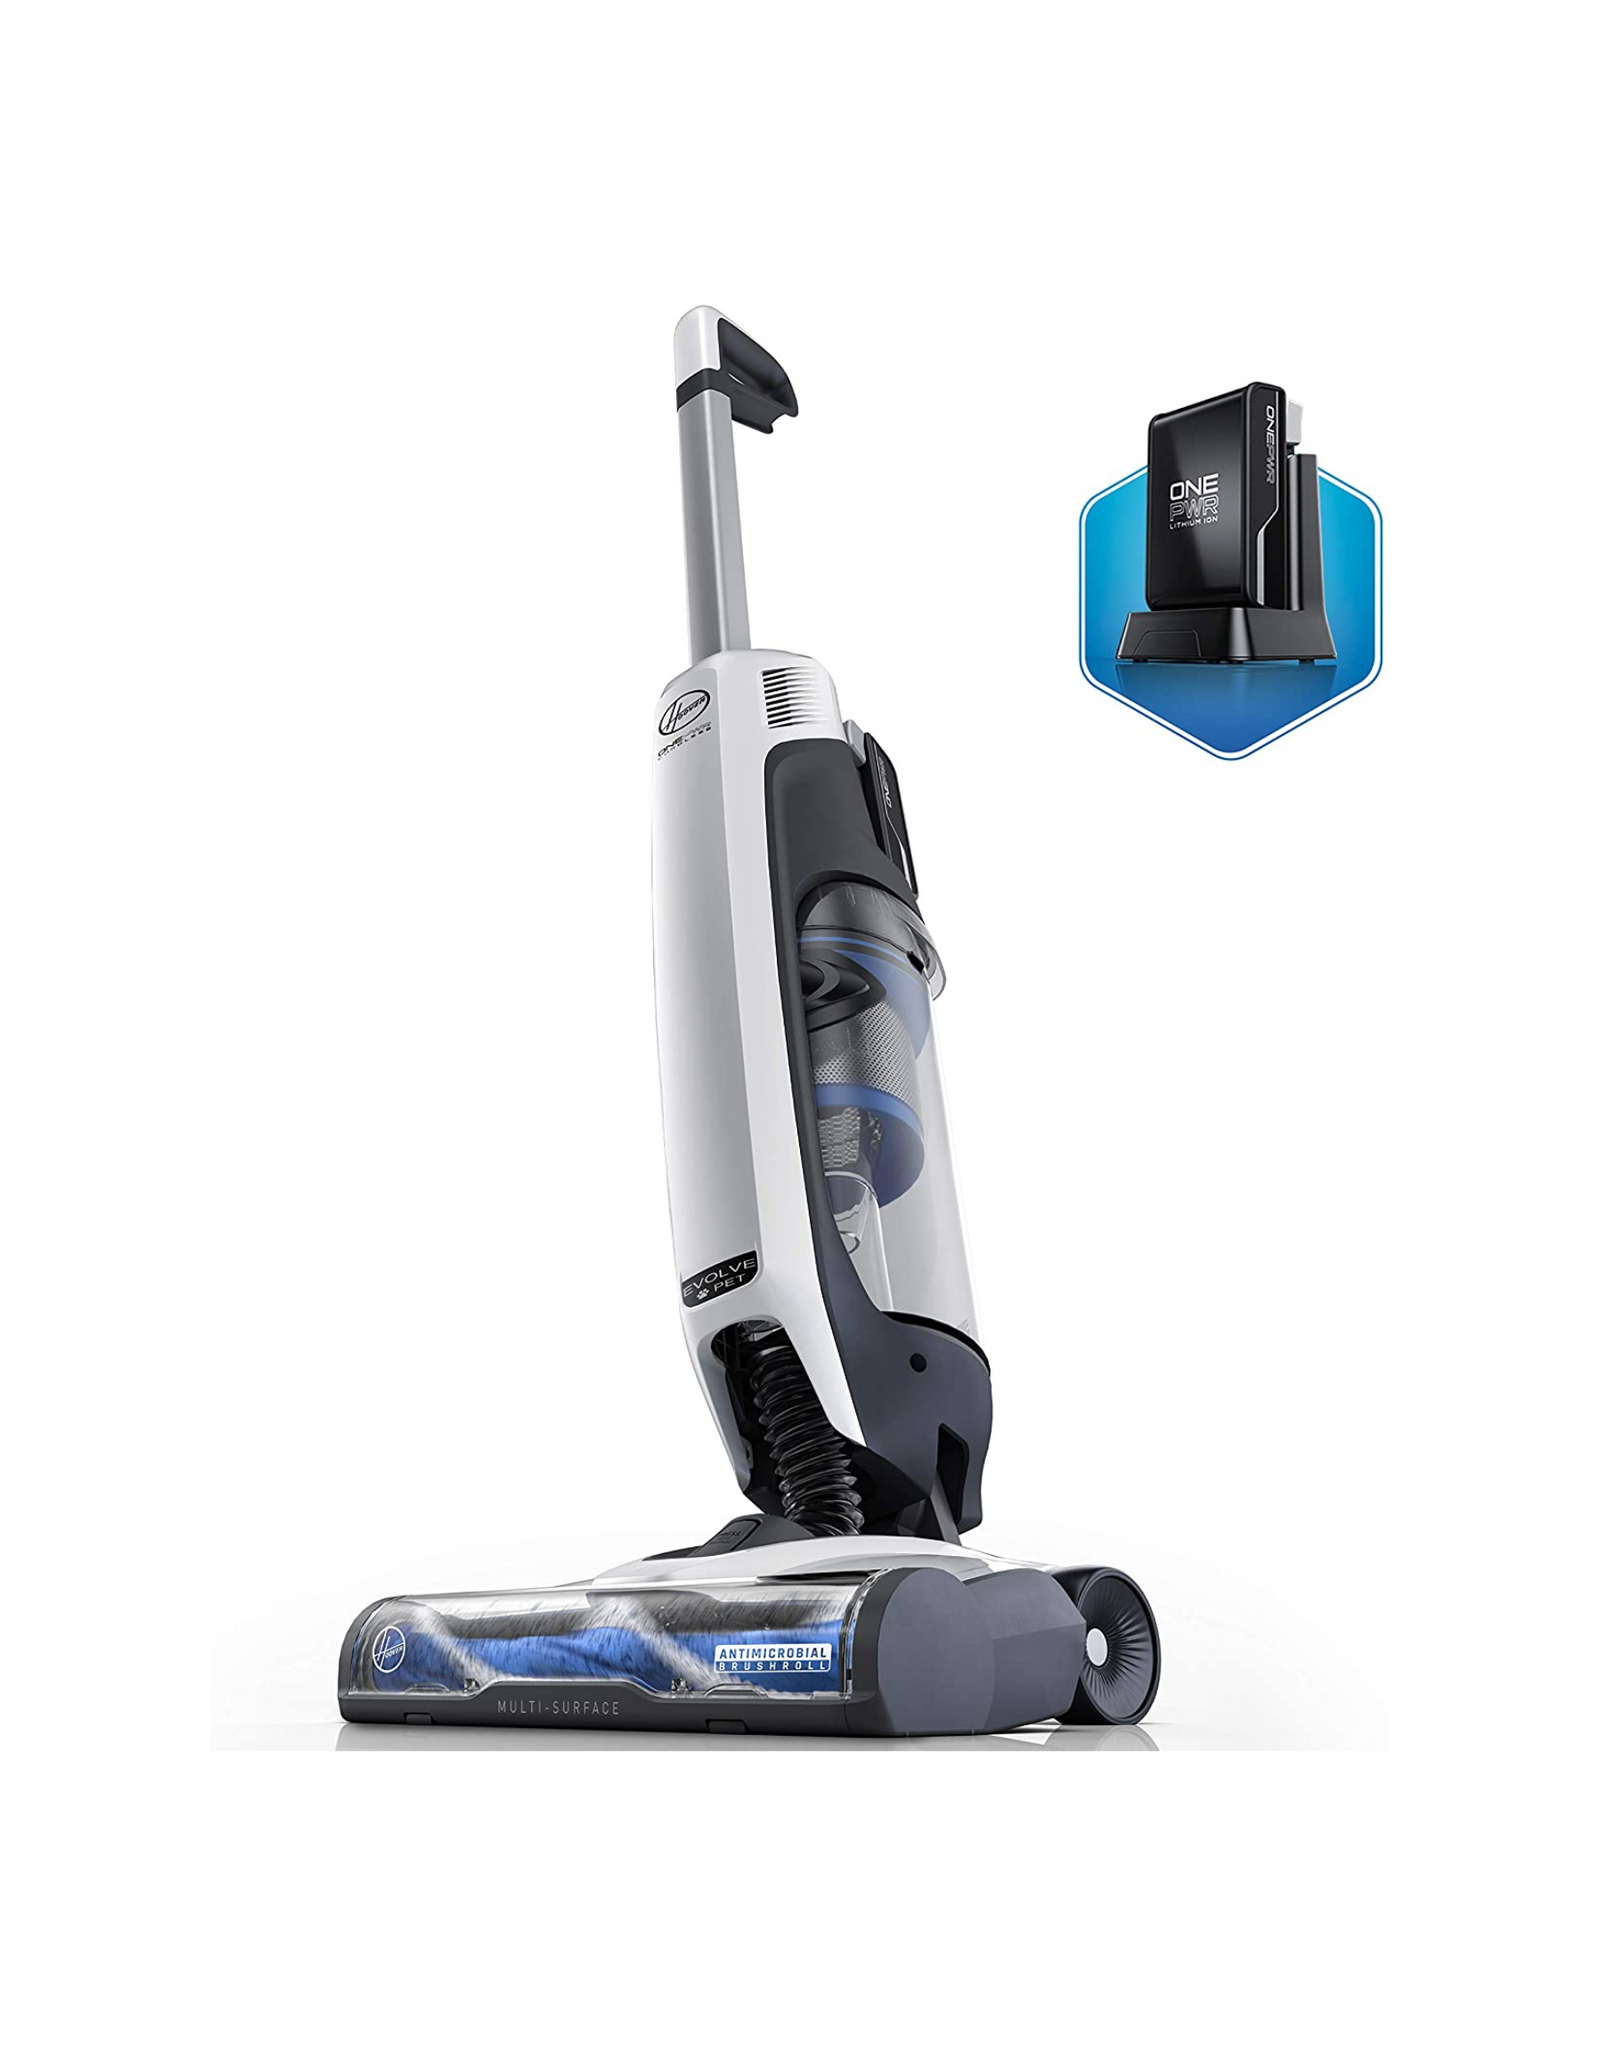 Hoover ONEPWR Evolve Pet Cordless Vacuum Cleaner BH53420V, Lightweight Stick Vac, White